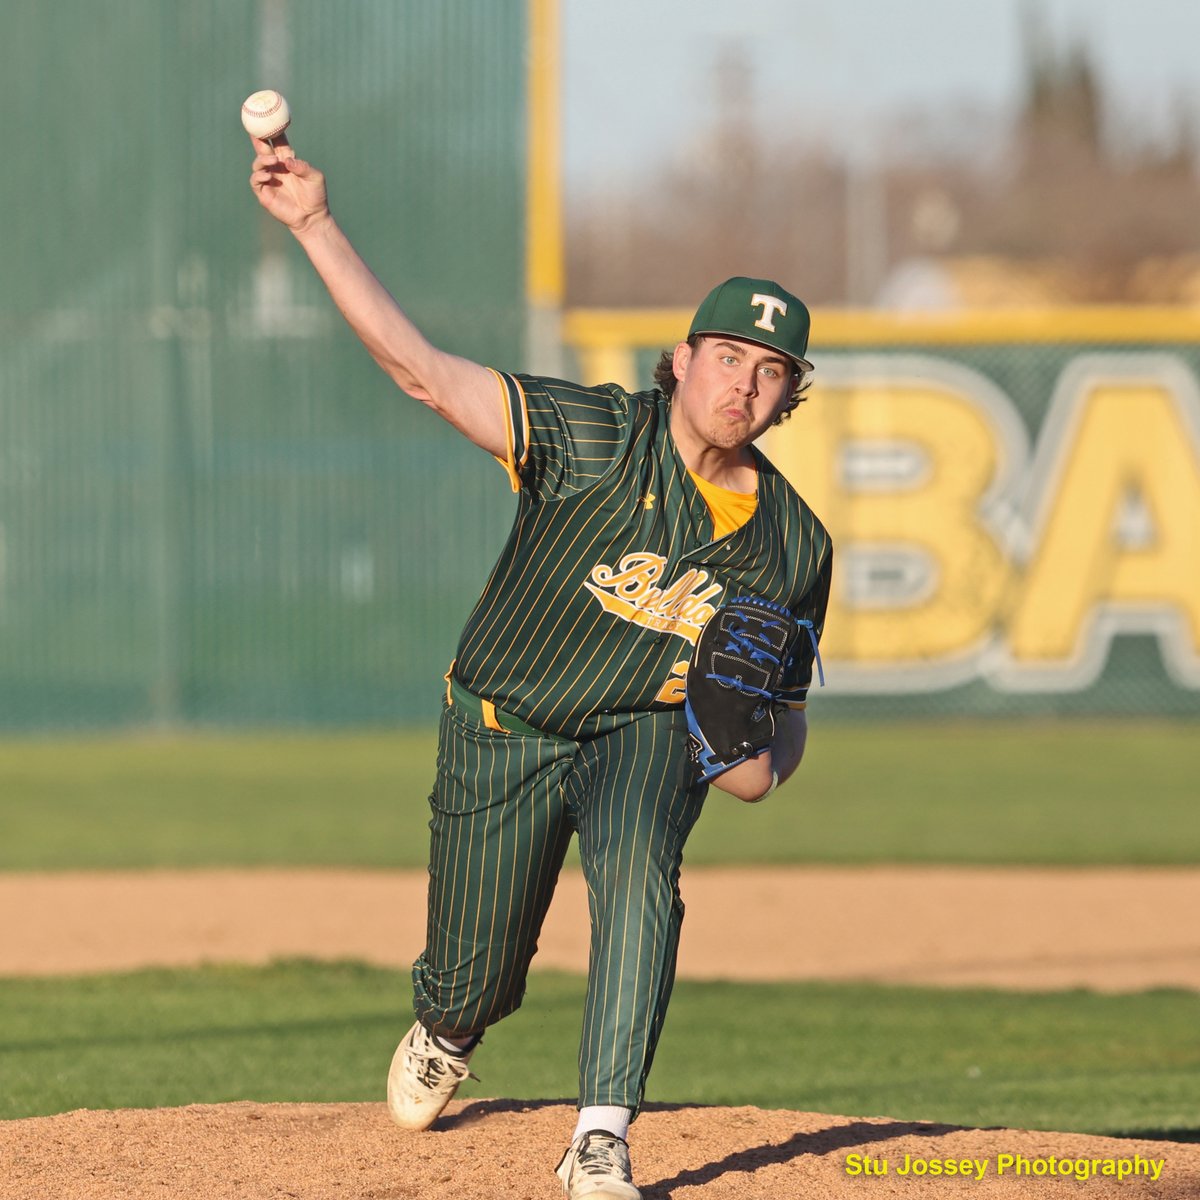 Tracy High Baseball loses to Atwater on Wednesday 3-1. Bulldogs are now 2-1 in the early season. tracyhighbaseball.com